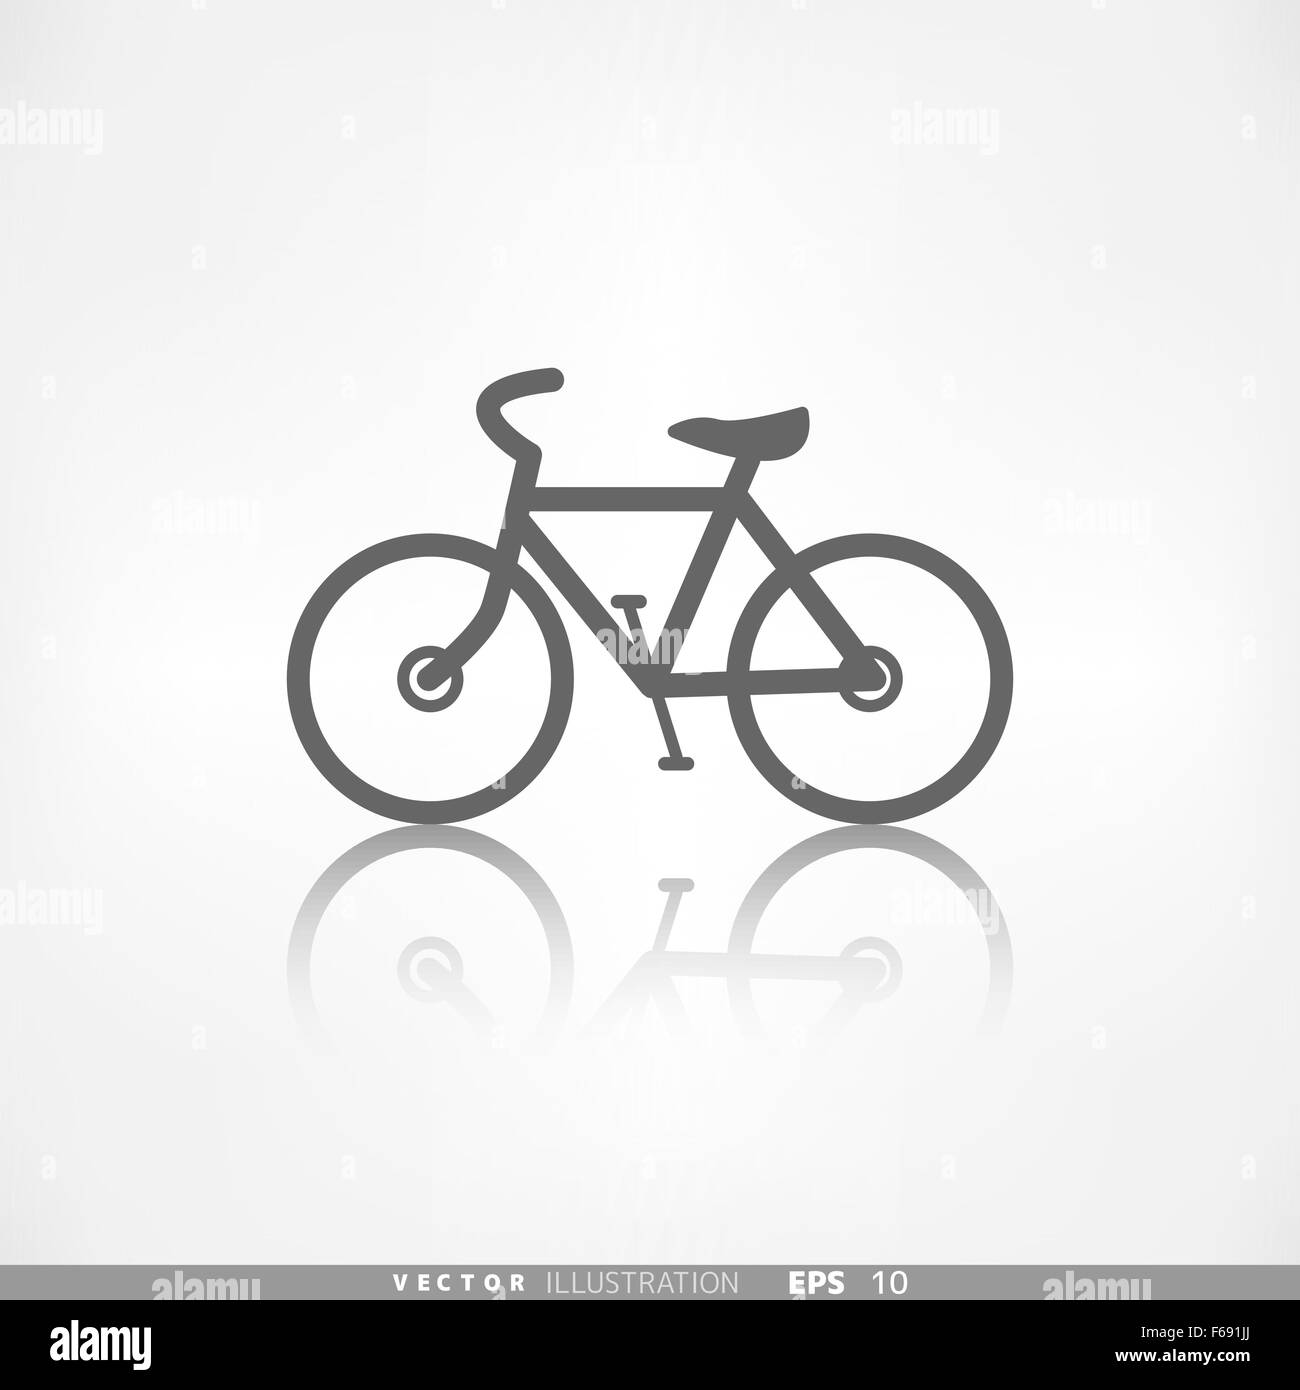 Hipster retro bicycle icon Stock Vector